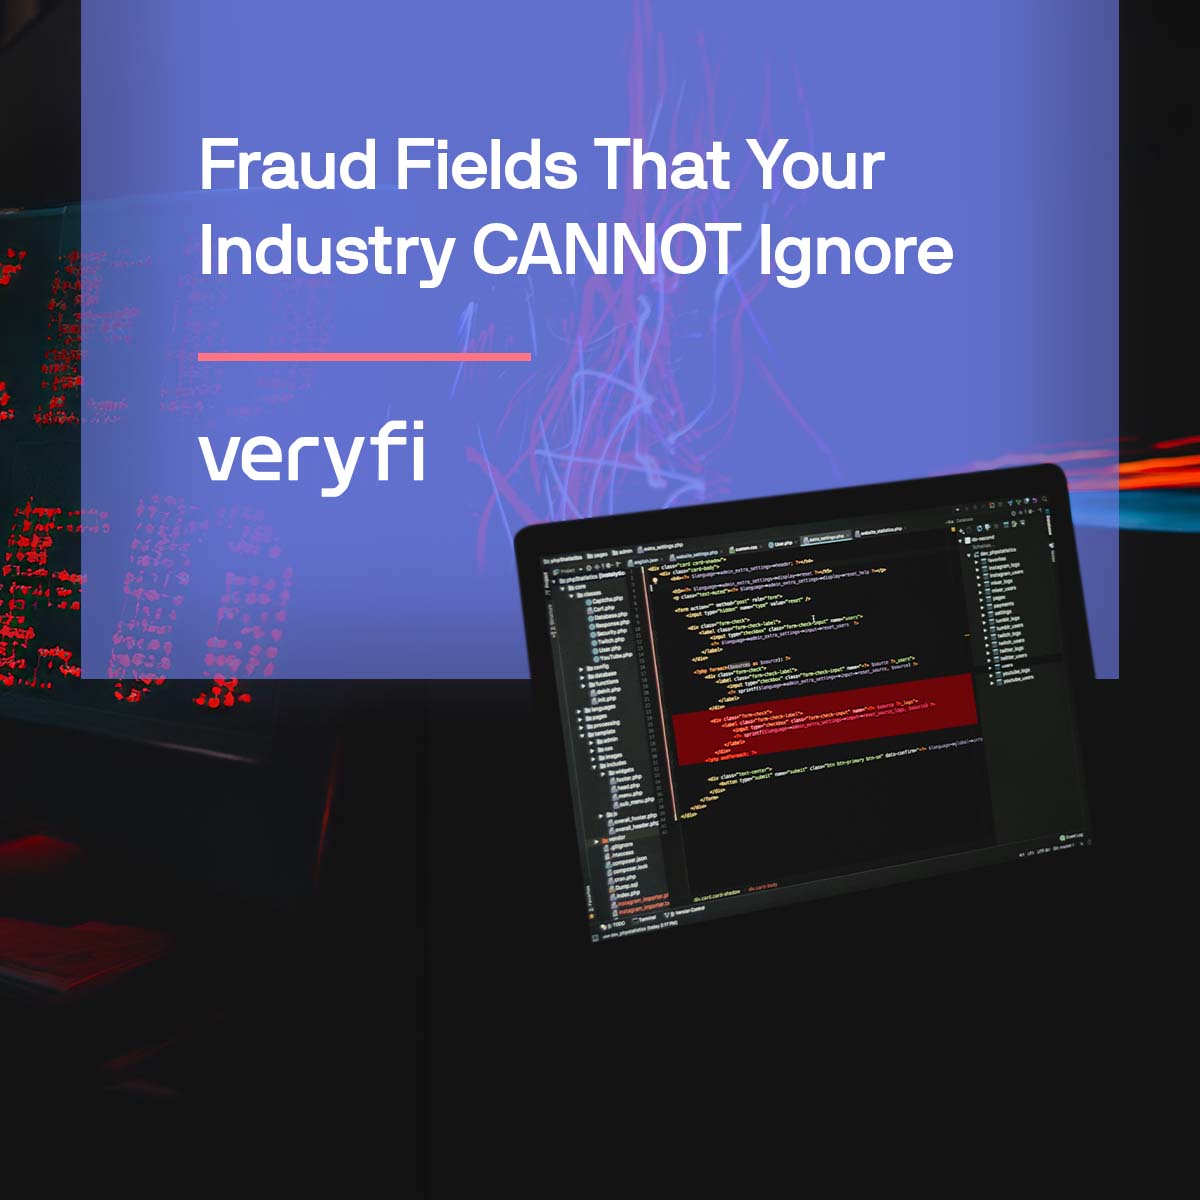 Types of Fraud that Your Industry Cannot Ignore